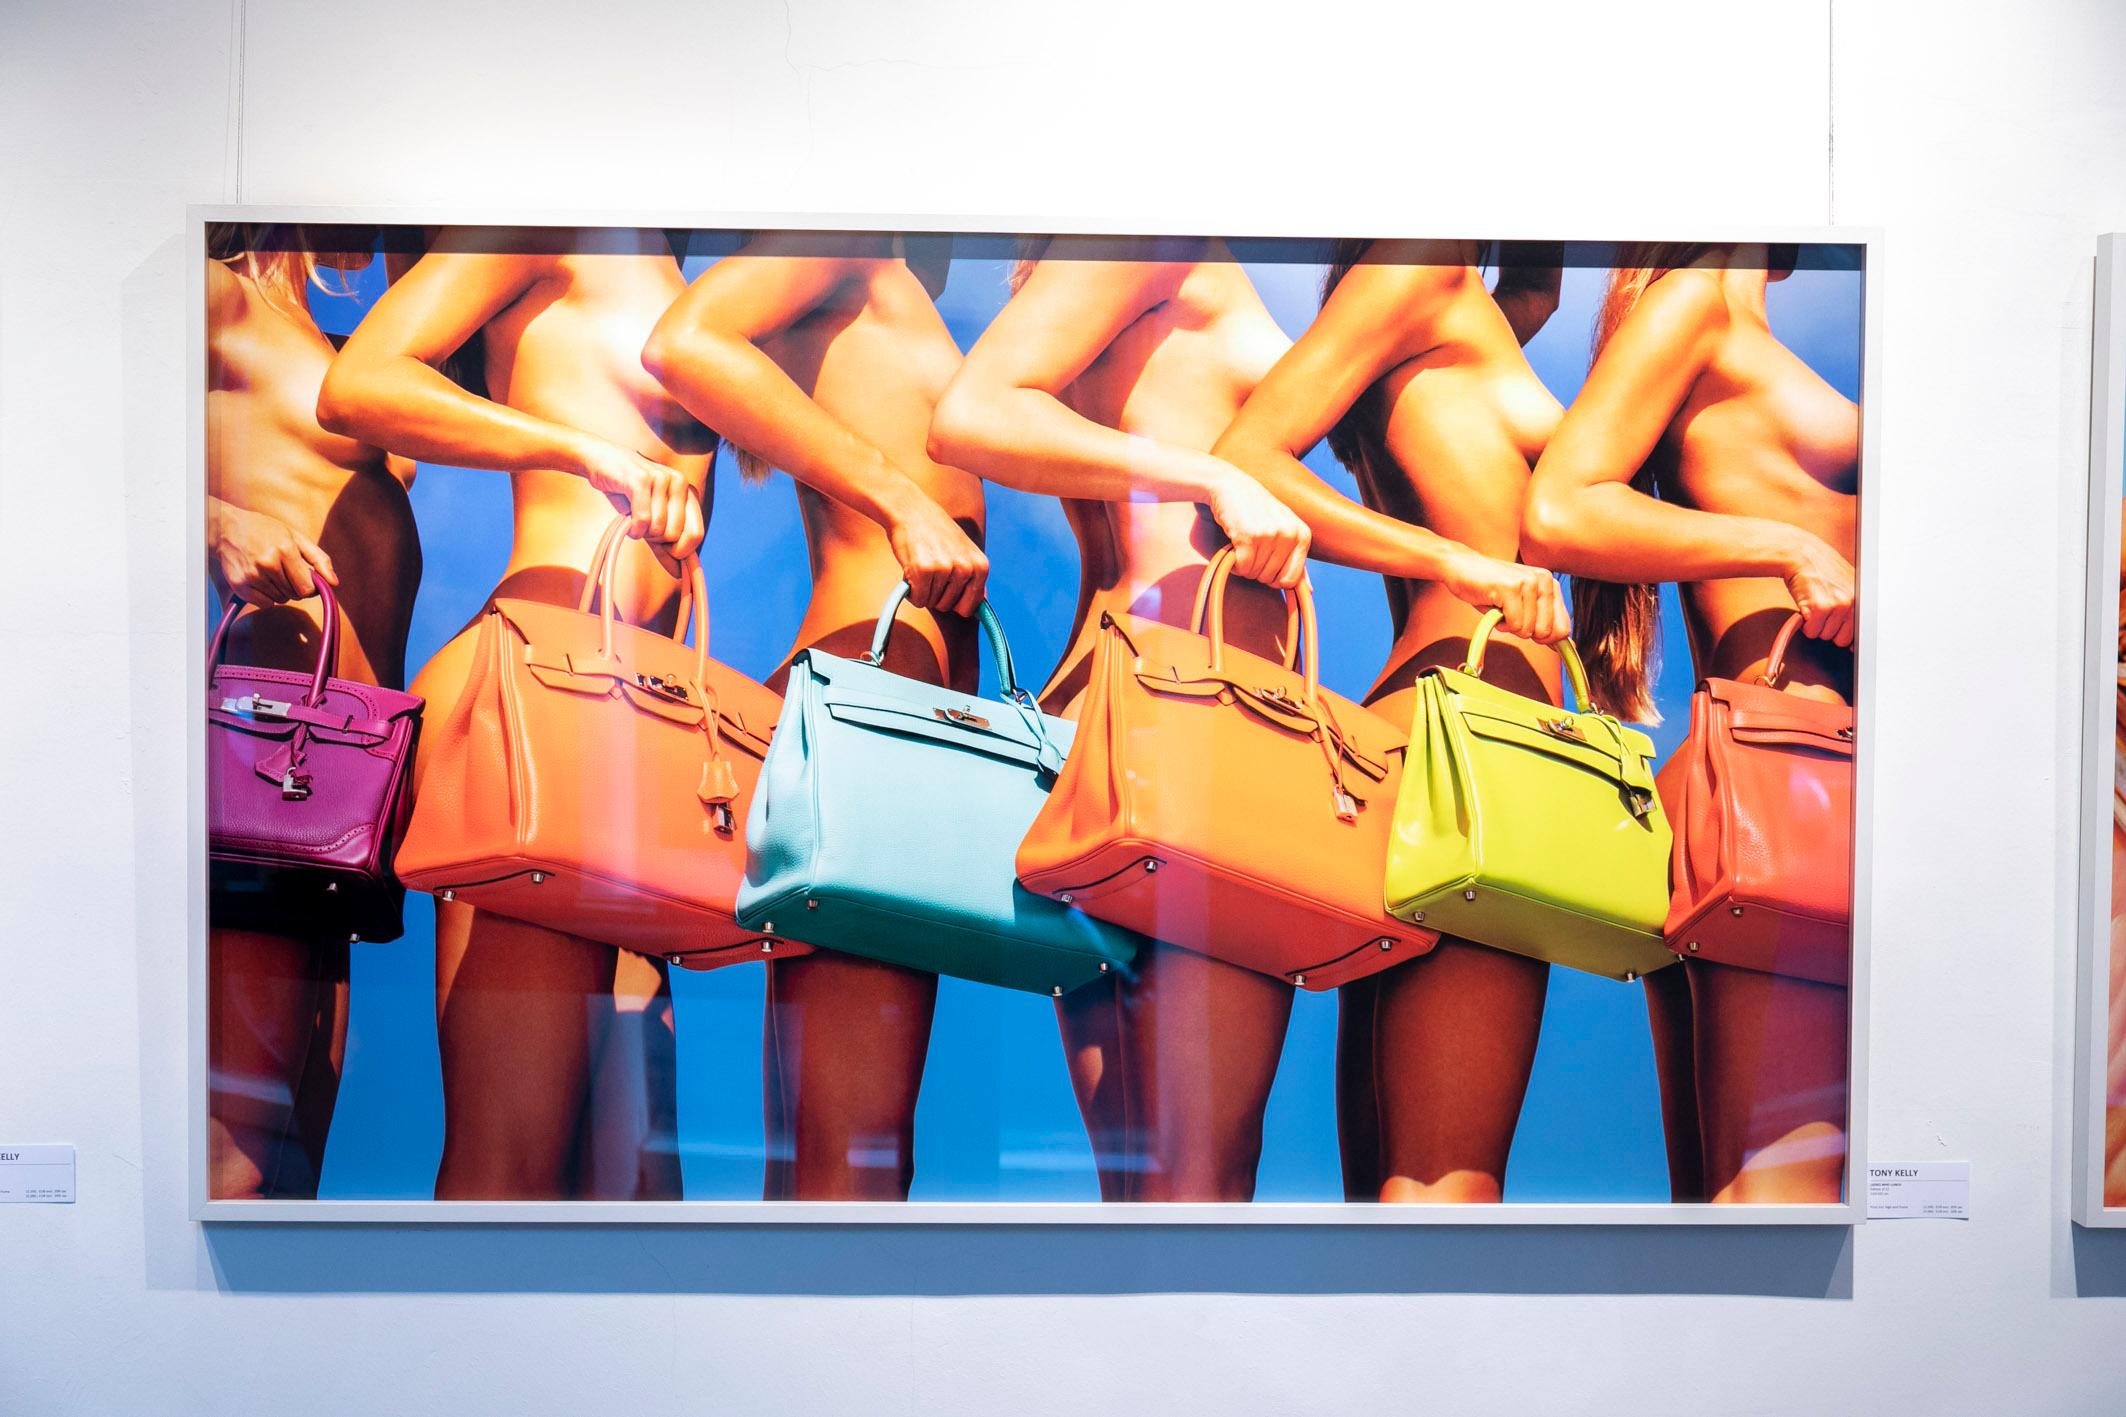 Ladies who lunch - colourfol nude portrait of models with Hermés Birkin bags. - Photograph by Tony Kelly